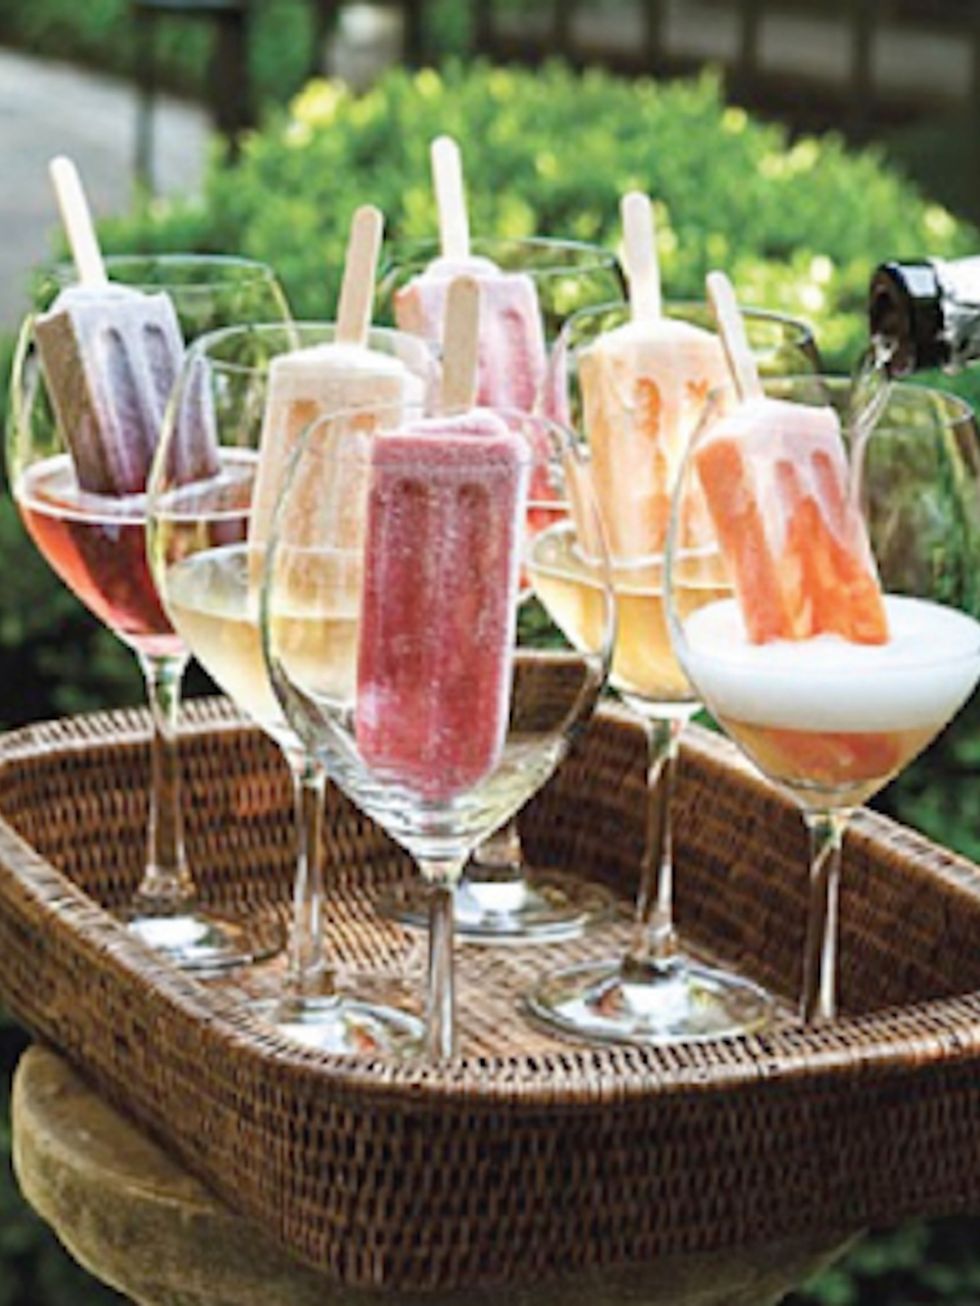 Popsicles or ice lollies - a very jolly way to spruce up a fizzy cocktail.